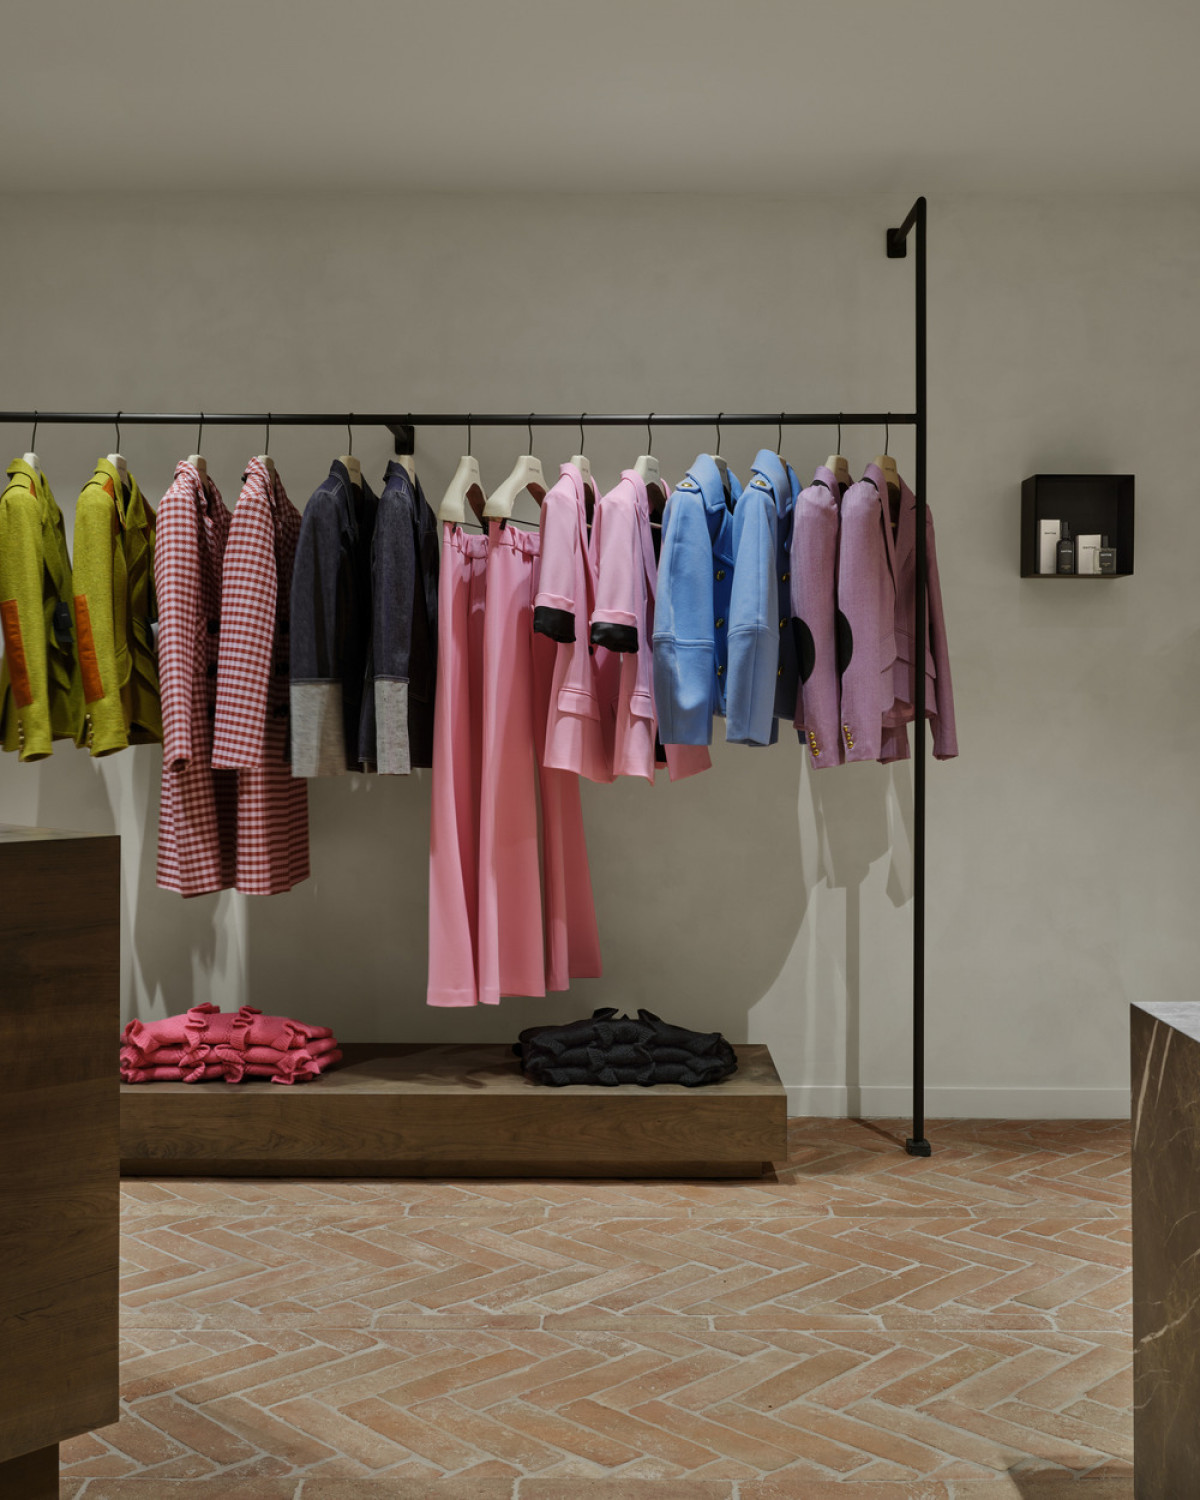 The interior's understated mood allows the fashion label's preference for brilliant colours to stand out.